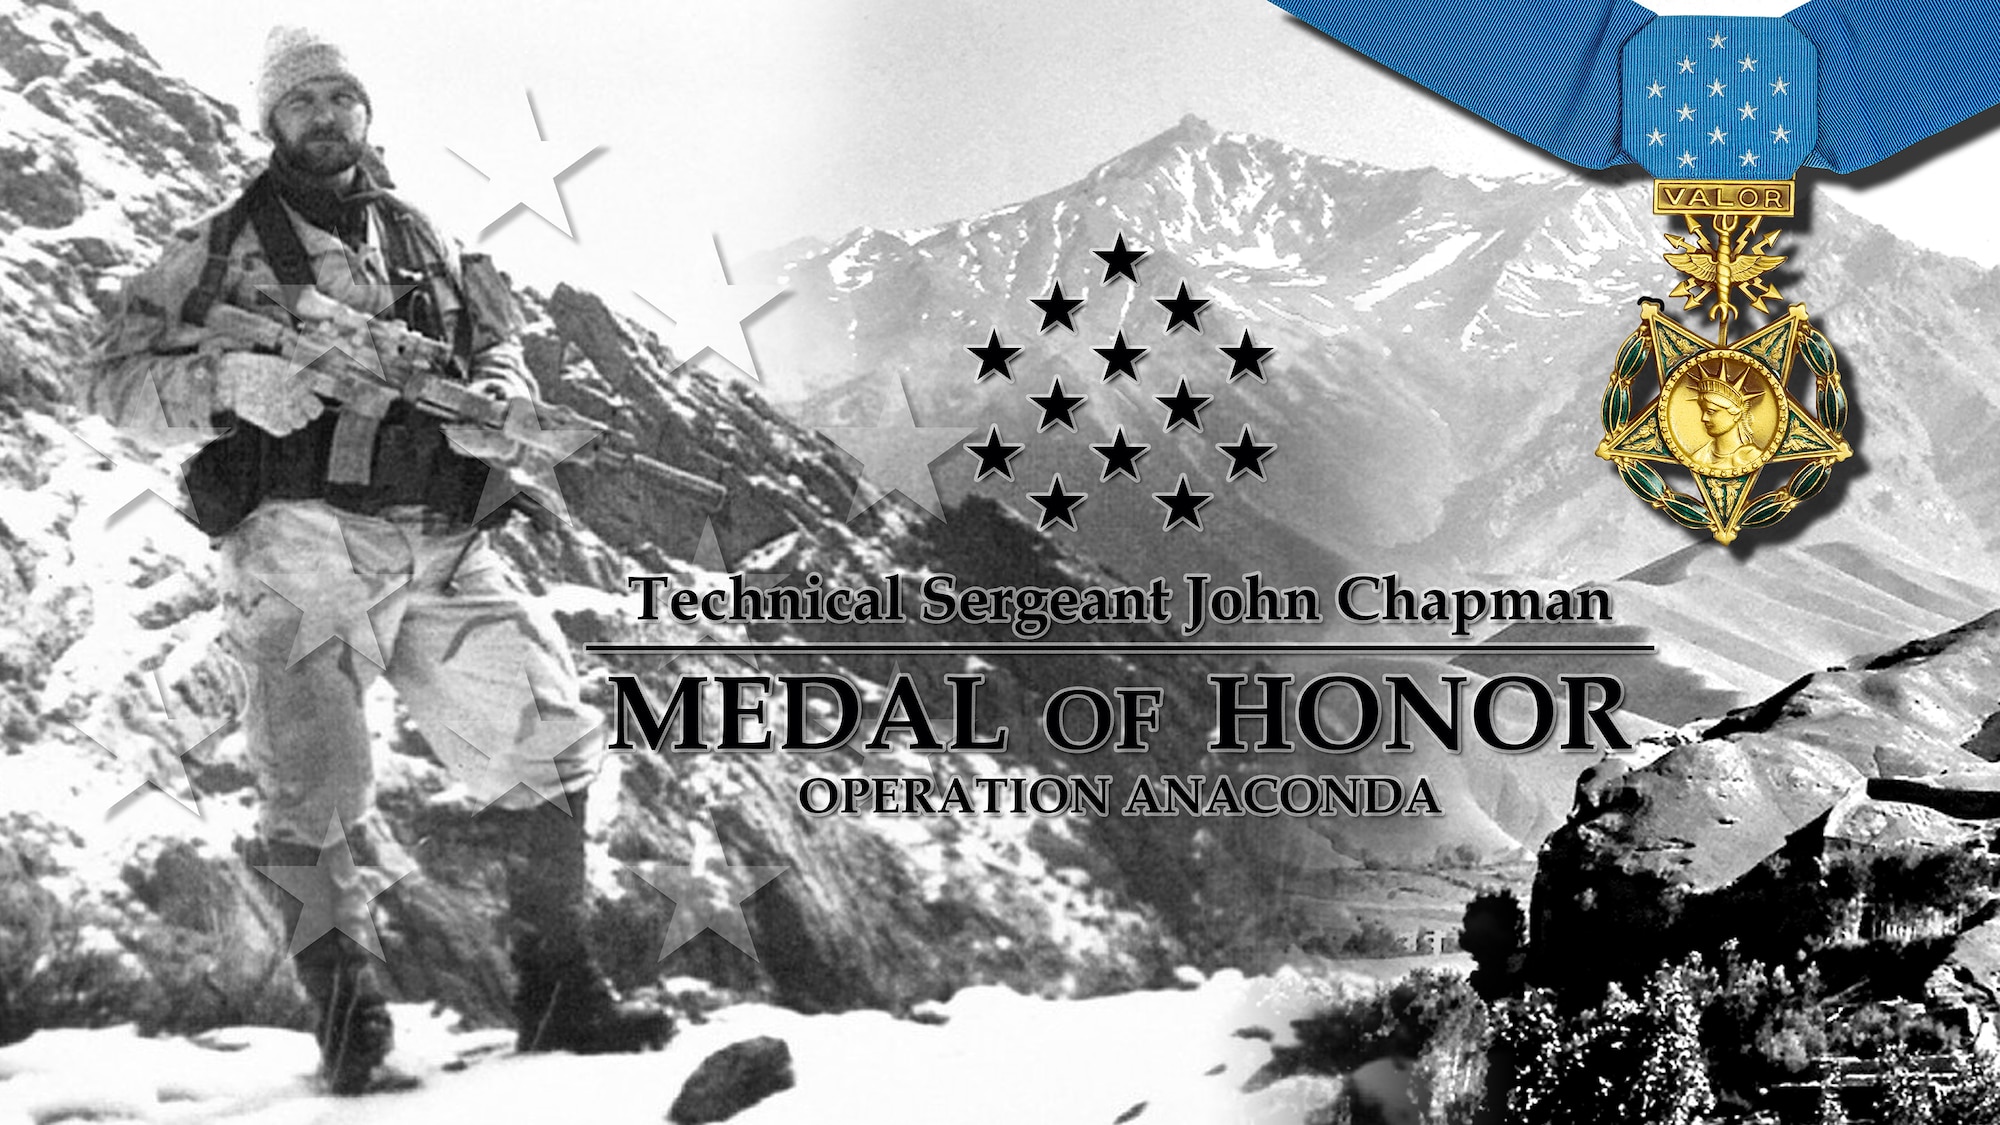 Technical Sgt. John A. Chapman, a Special Tactics Combat Controller, will be posthumously awarded the Medal of Honor for his extraordinary heroism in March 2002 while deployed in Afghanistan.